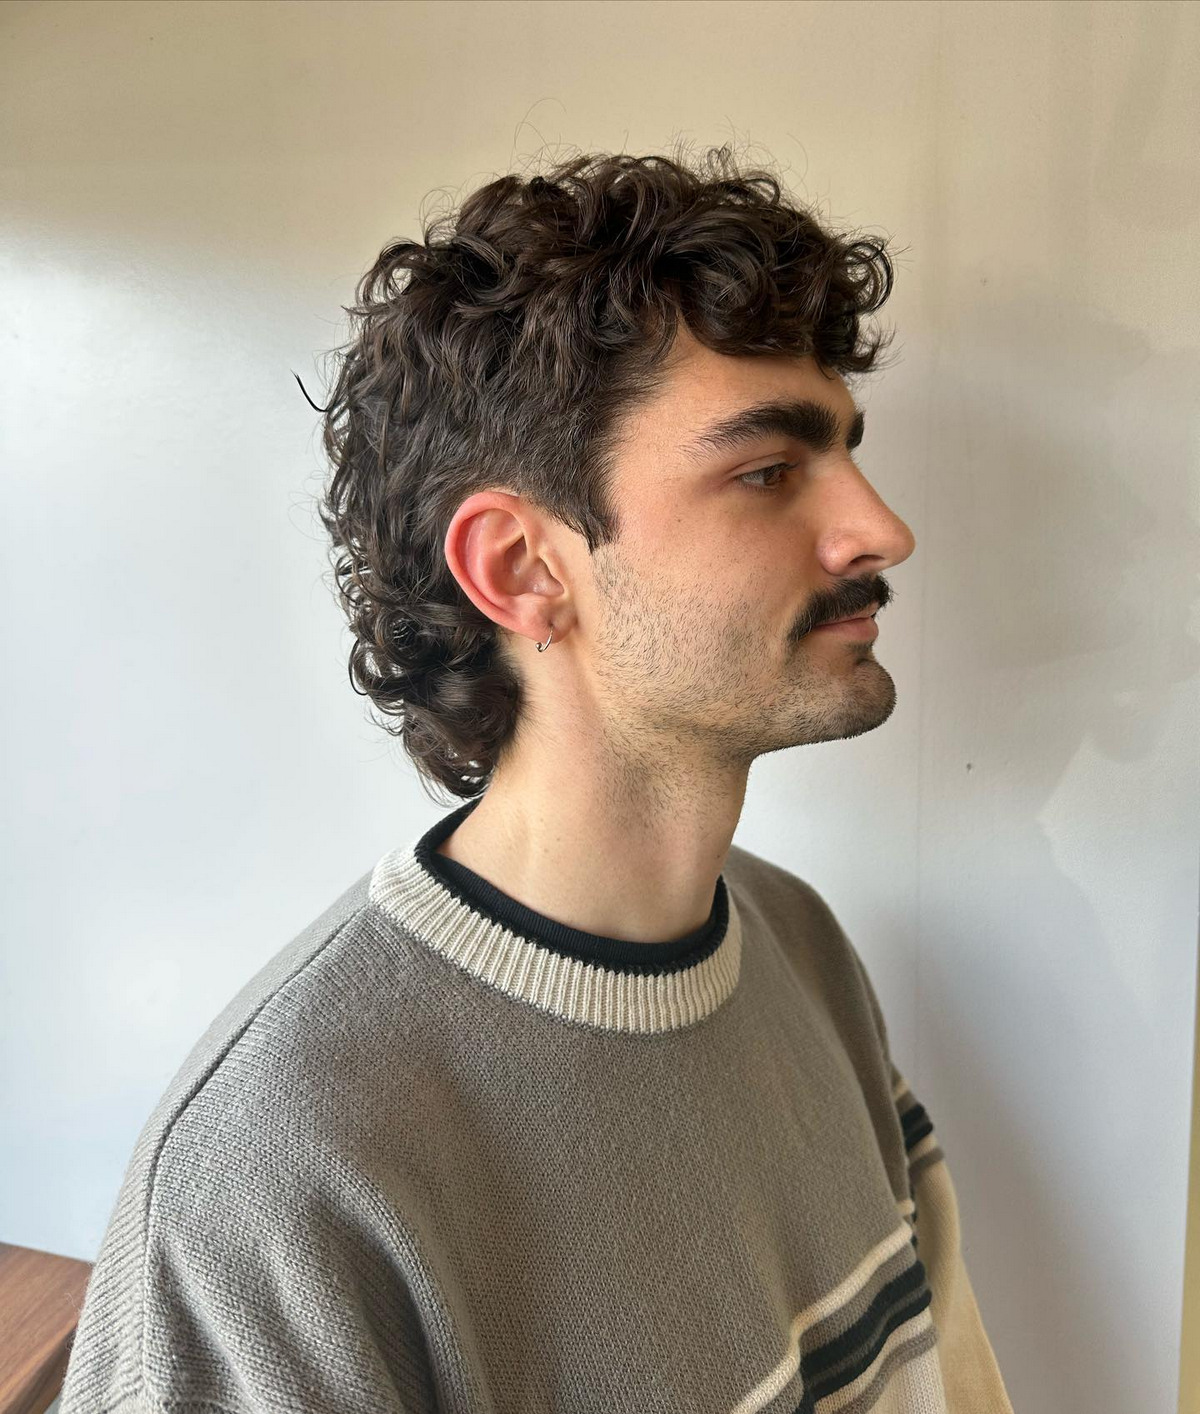 Curly Mullet hairstyle 